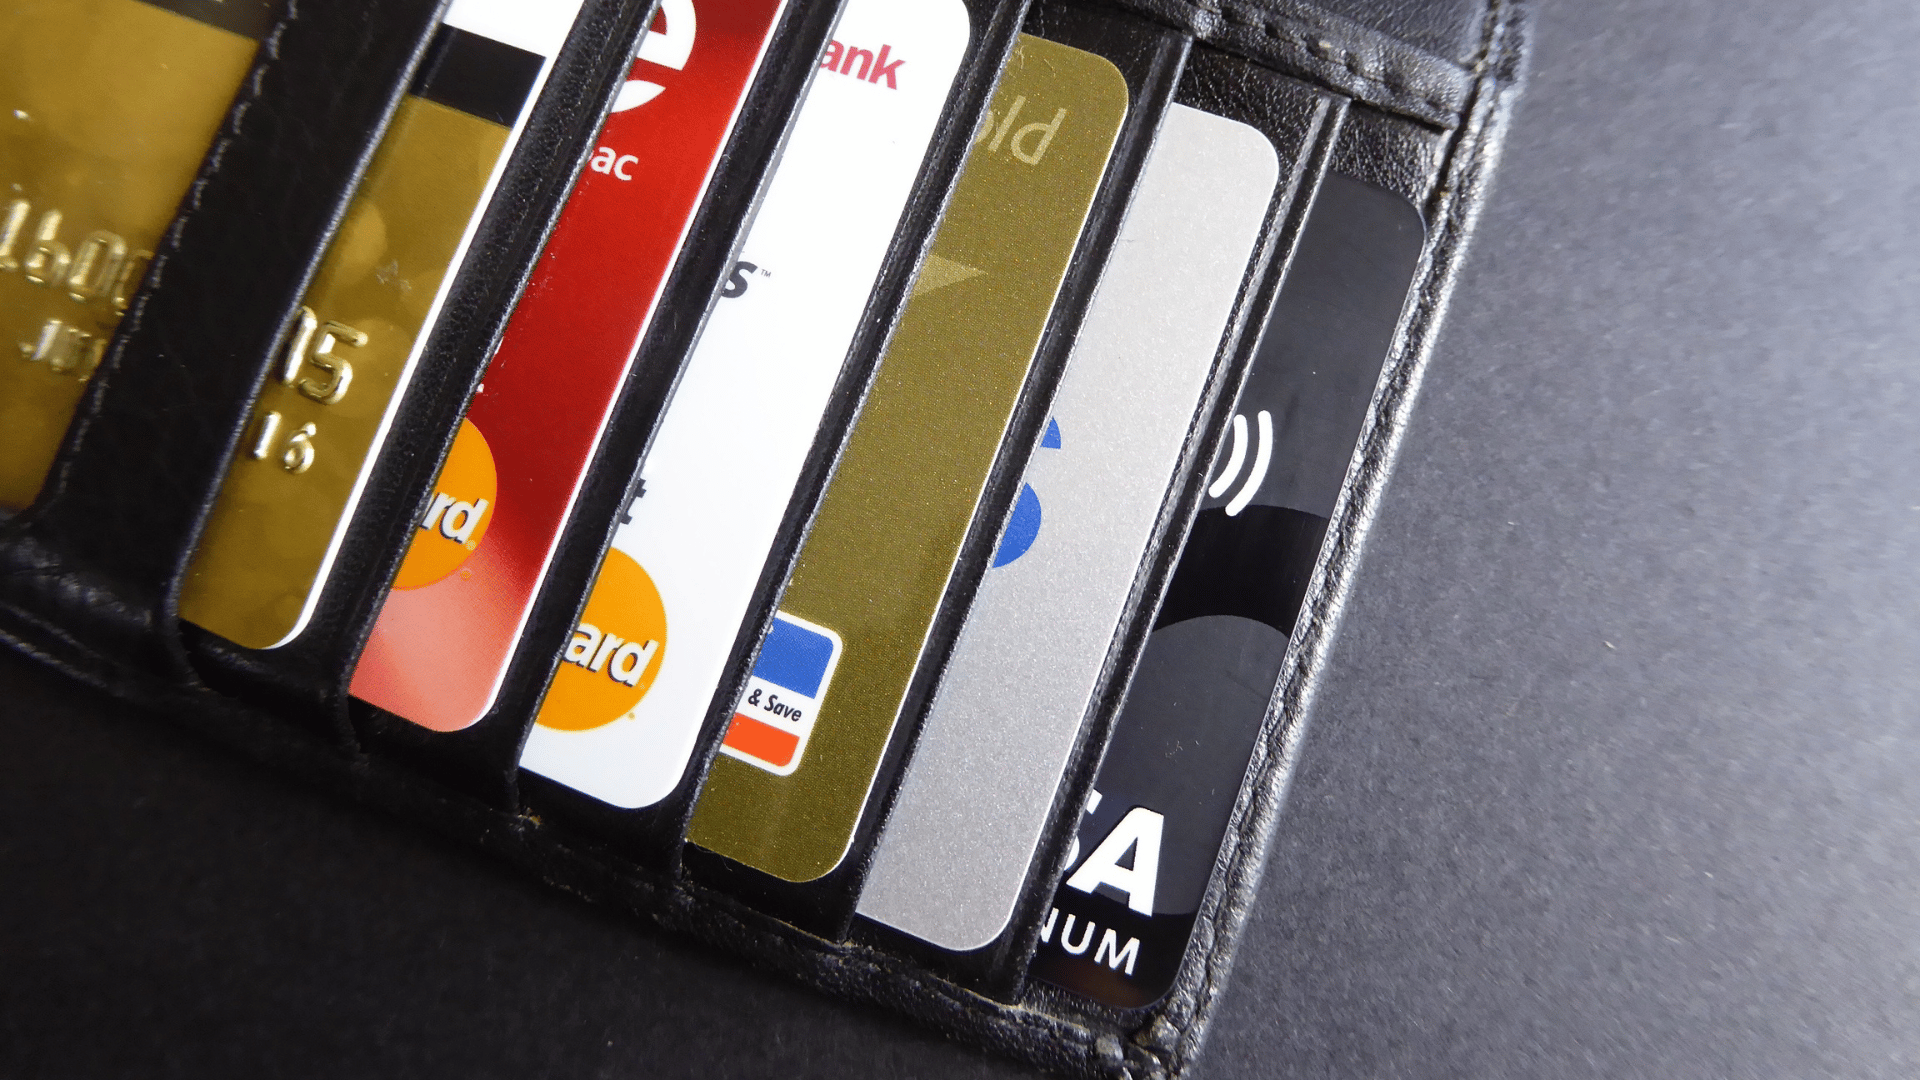 An image of small business owners wallet, showing a variety of credit cards.